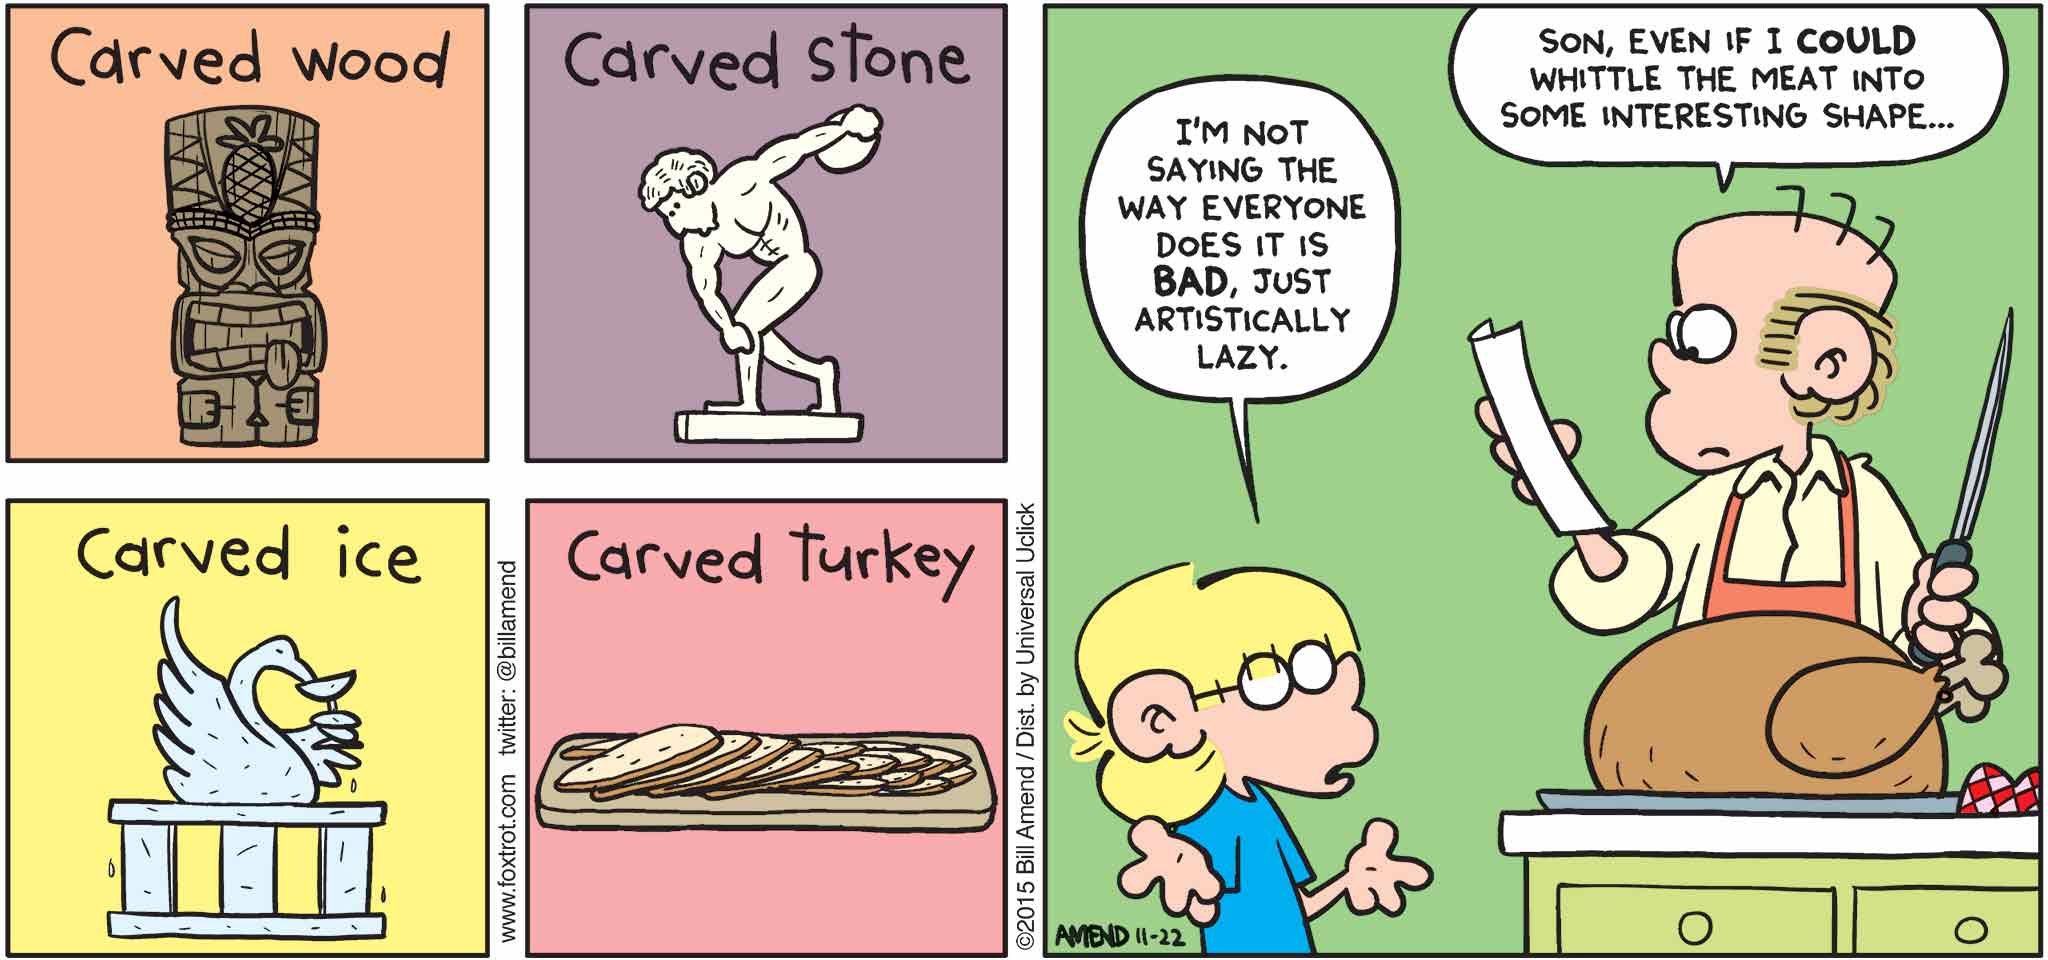 FoxTrot by Bill Amend - "Culinary Art" published November 22, 2015 - Carved Wood. Carved Stone. Carved Ice. Carved Turkey. Jason: I'm not saying the way everyone does it is bad, just artistically lazy. Roger: Son, even I could whittle the meat into some interesting shape...